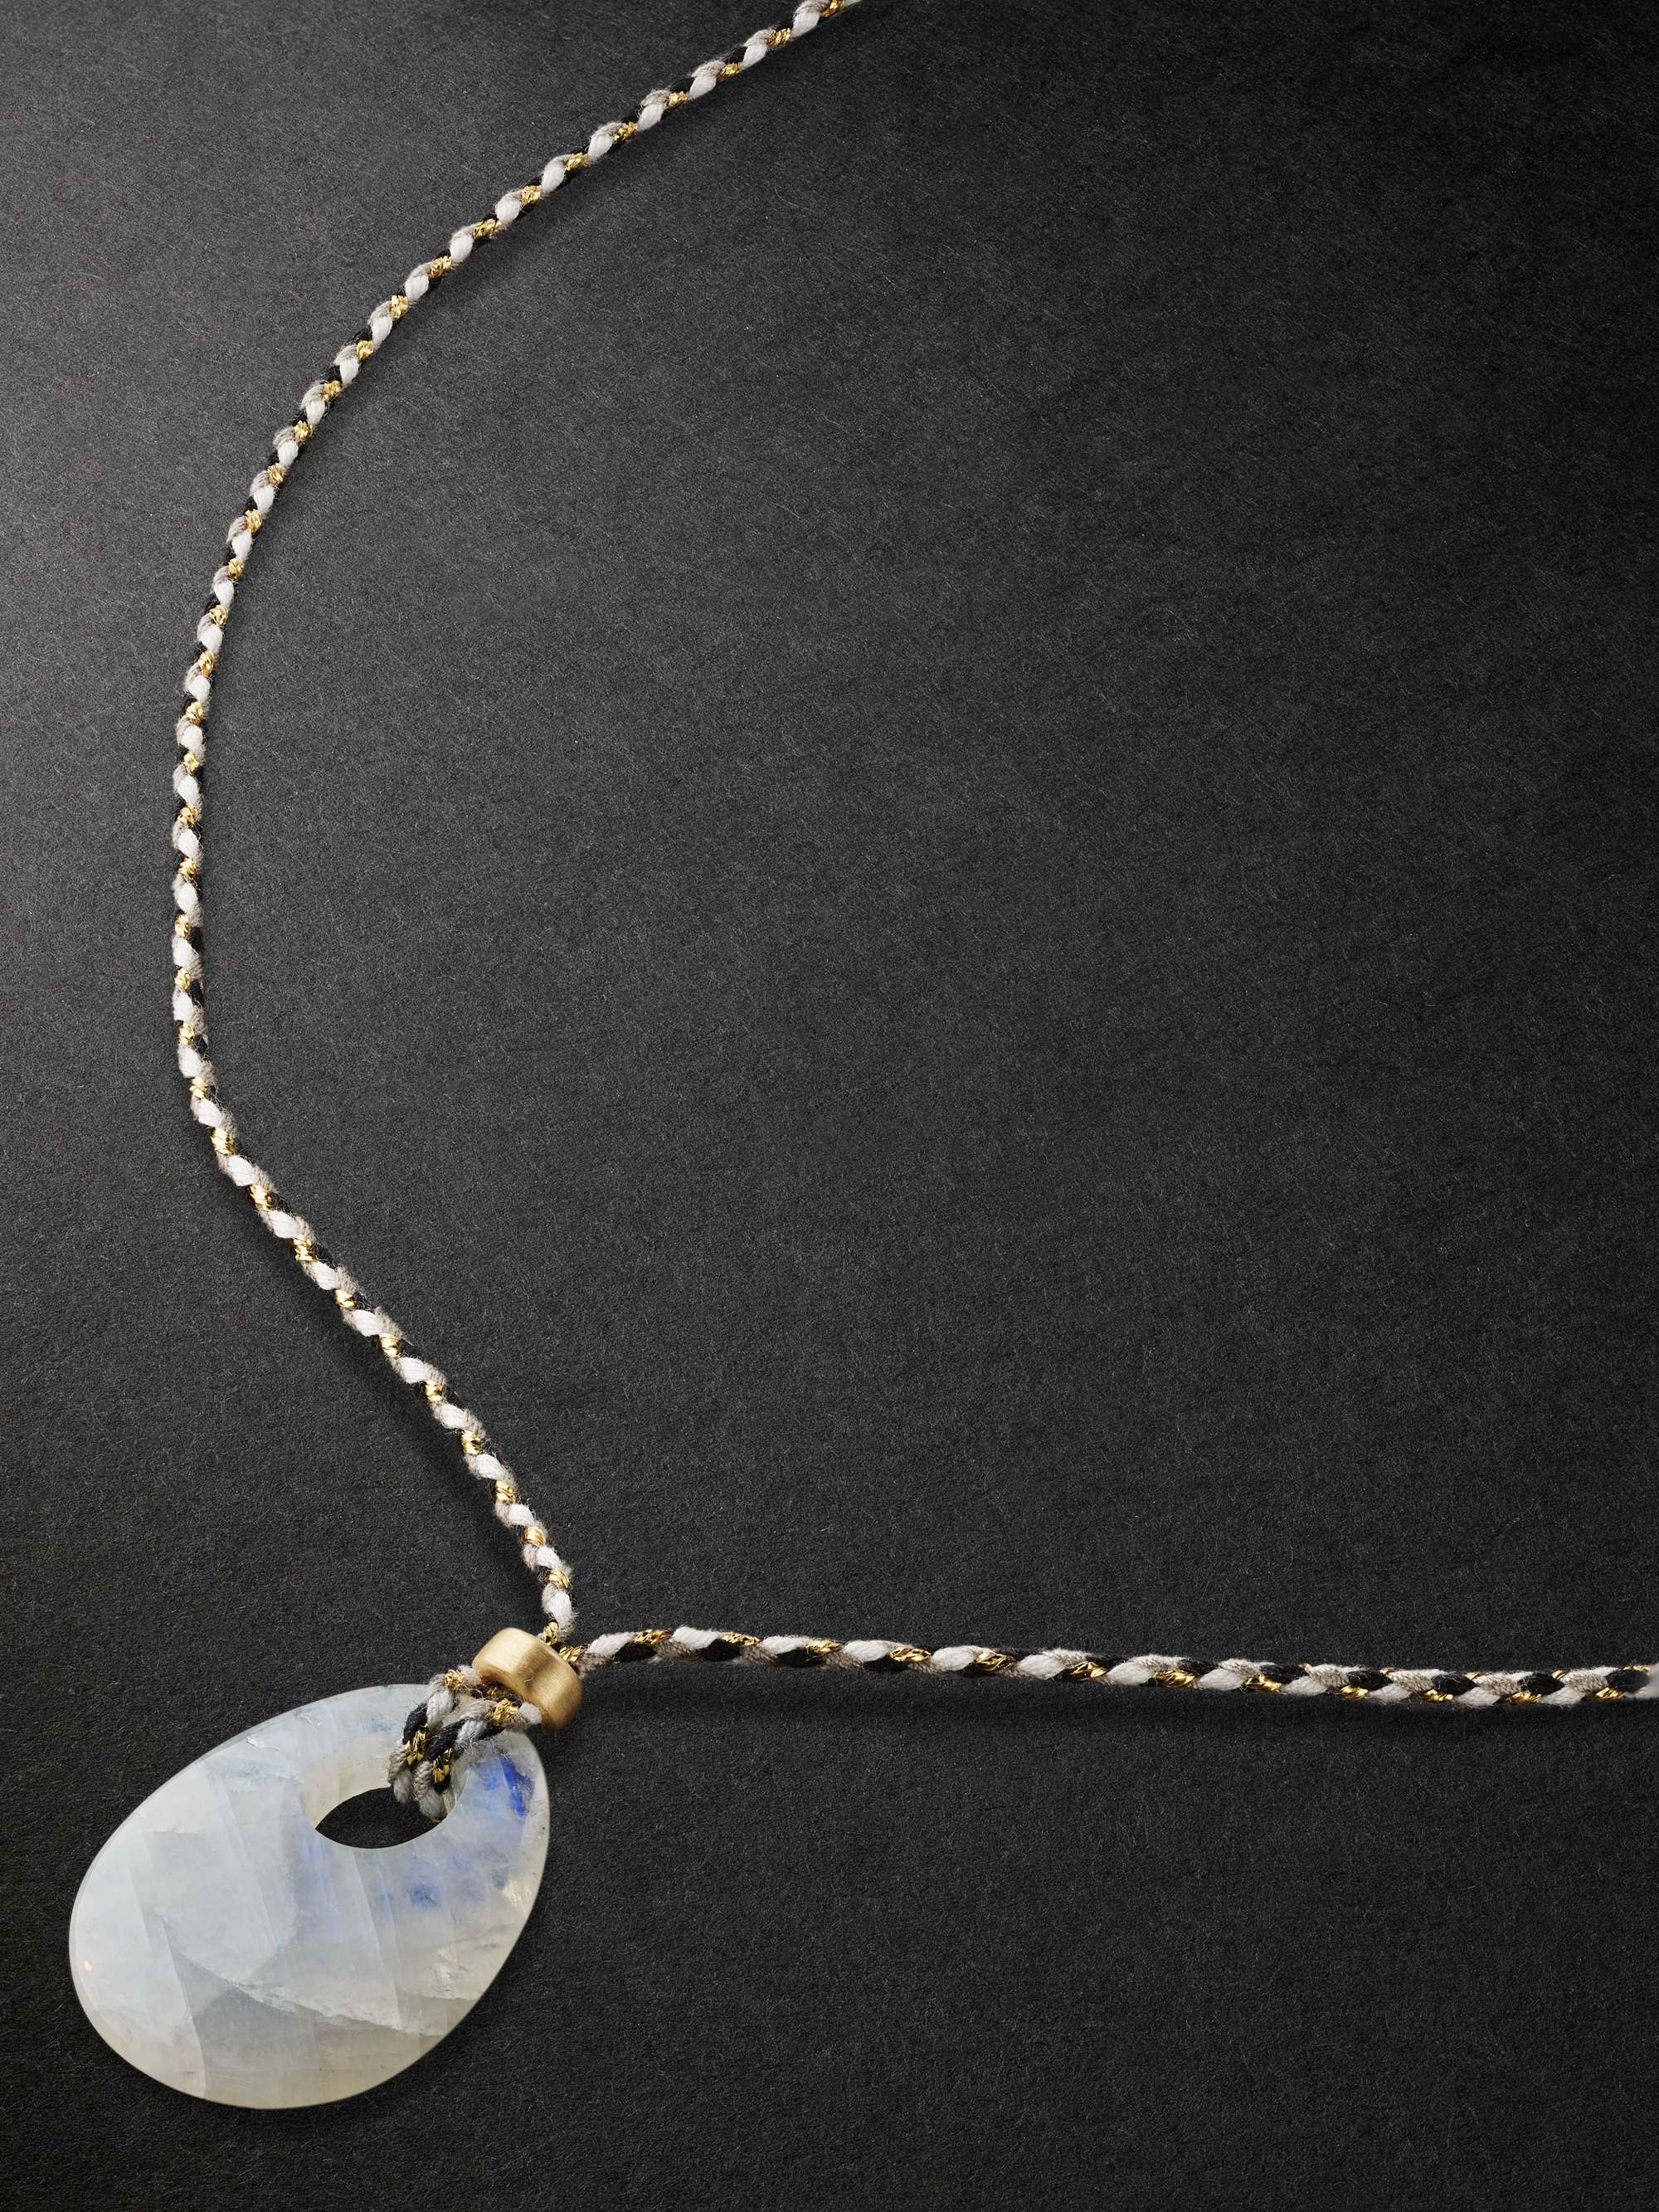 JACQUIE AICHE Gold, Moonstone and Cord Necklace | MR PORTER